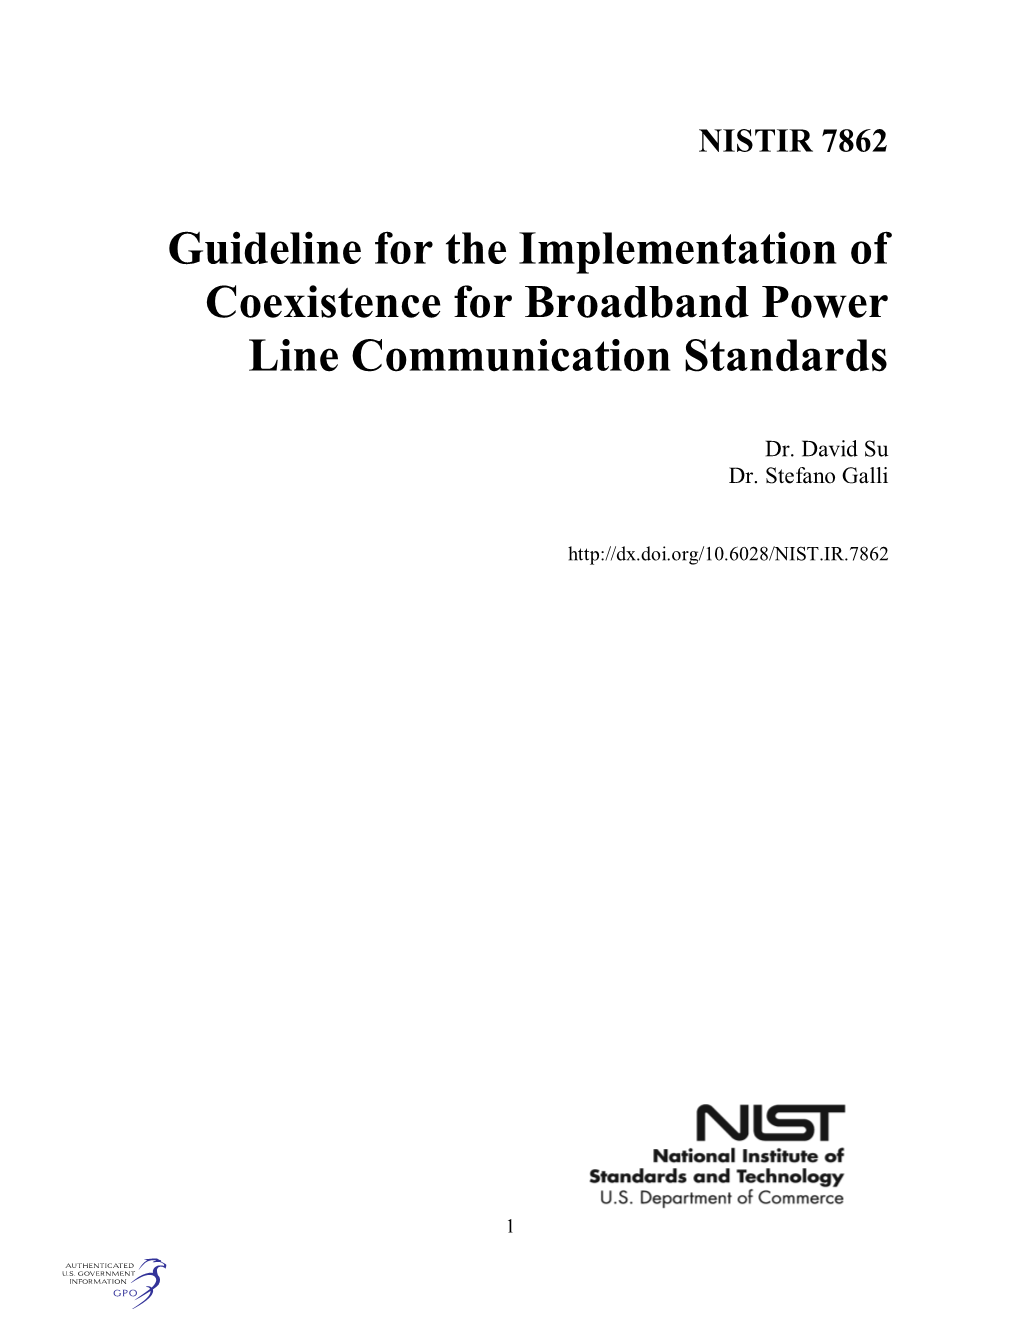 Guideline for the Implementation of Coexistence for Broadband Power Line Communication Standards